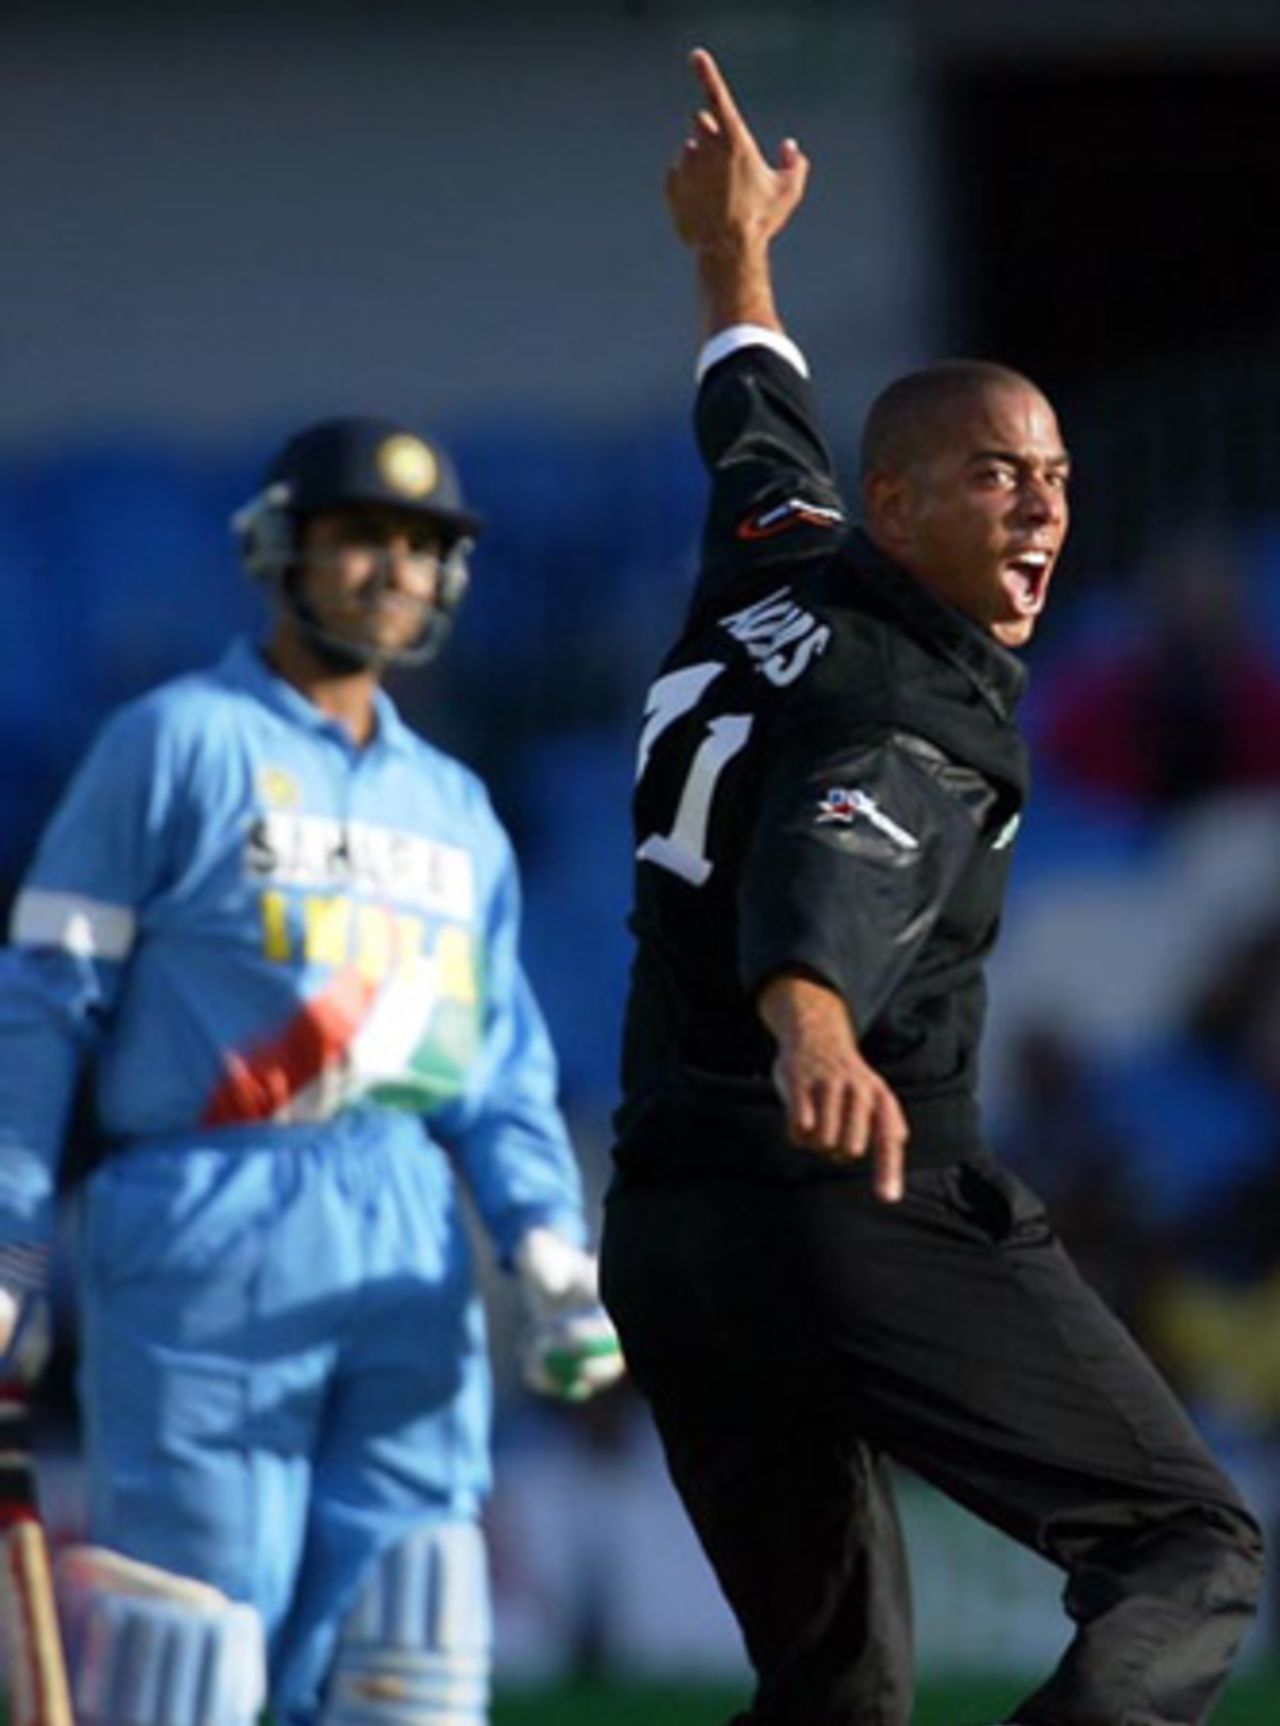 New Zealand bowler Andre Adams successfully appeals for the dismissal of Indian batsman Sourav Ganguly, caught by wicket-keeper Brendon McCullum for 23. 6th ODI: New Zealand v India at Eden Park, Auckland, 11 January 2003.